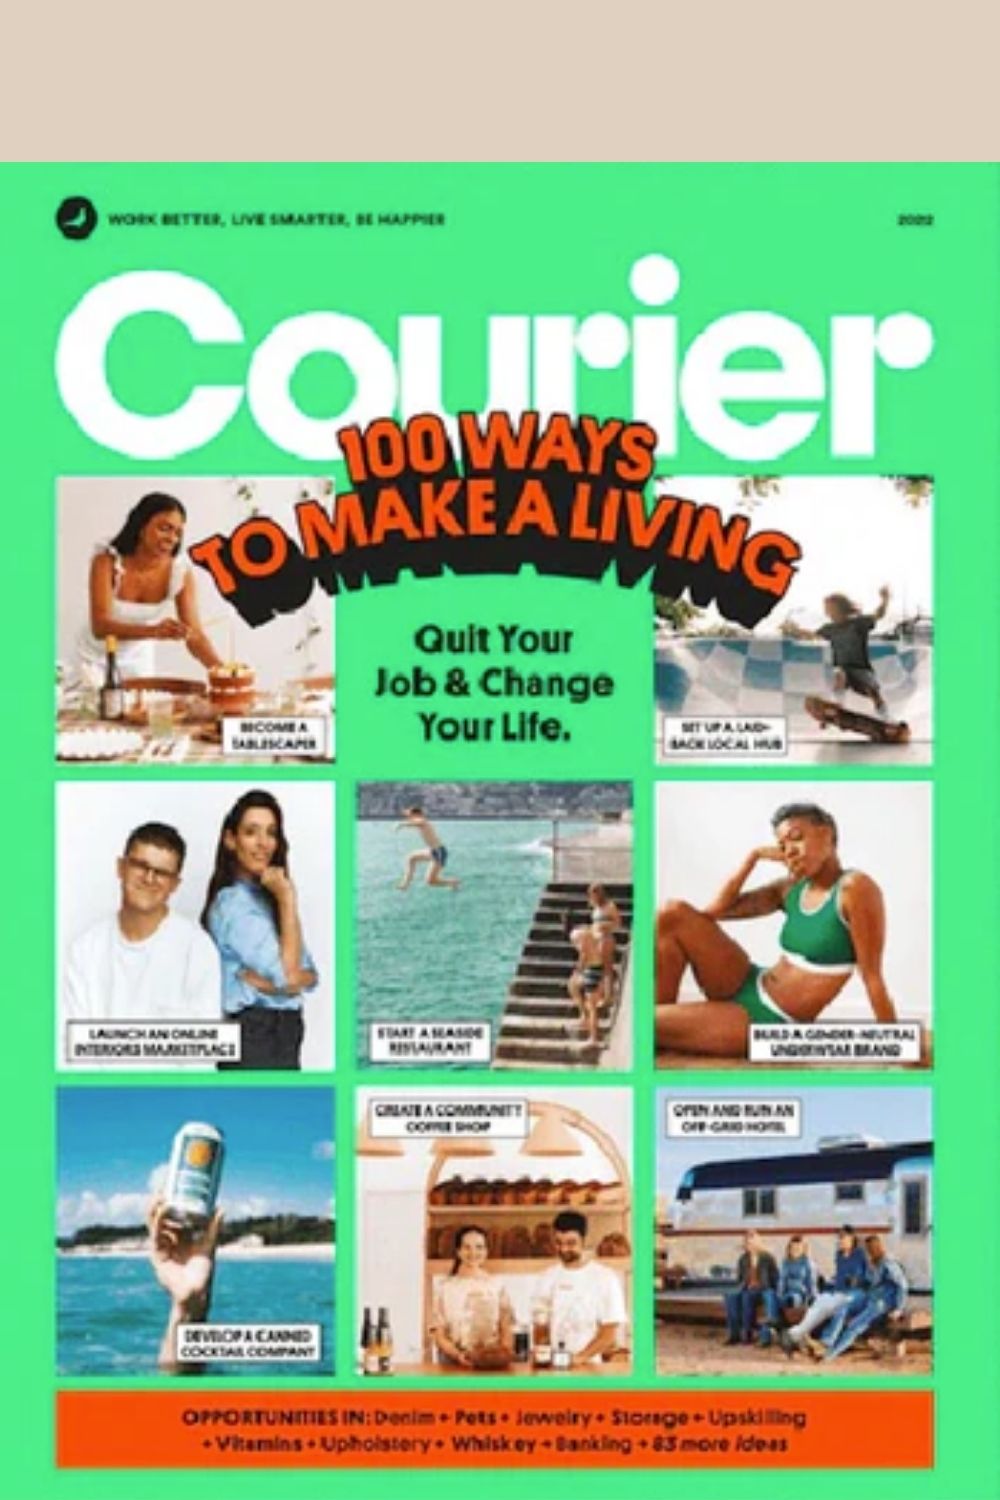 Courier Guide - 100 Ways to Make a Living 2022